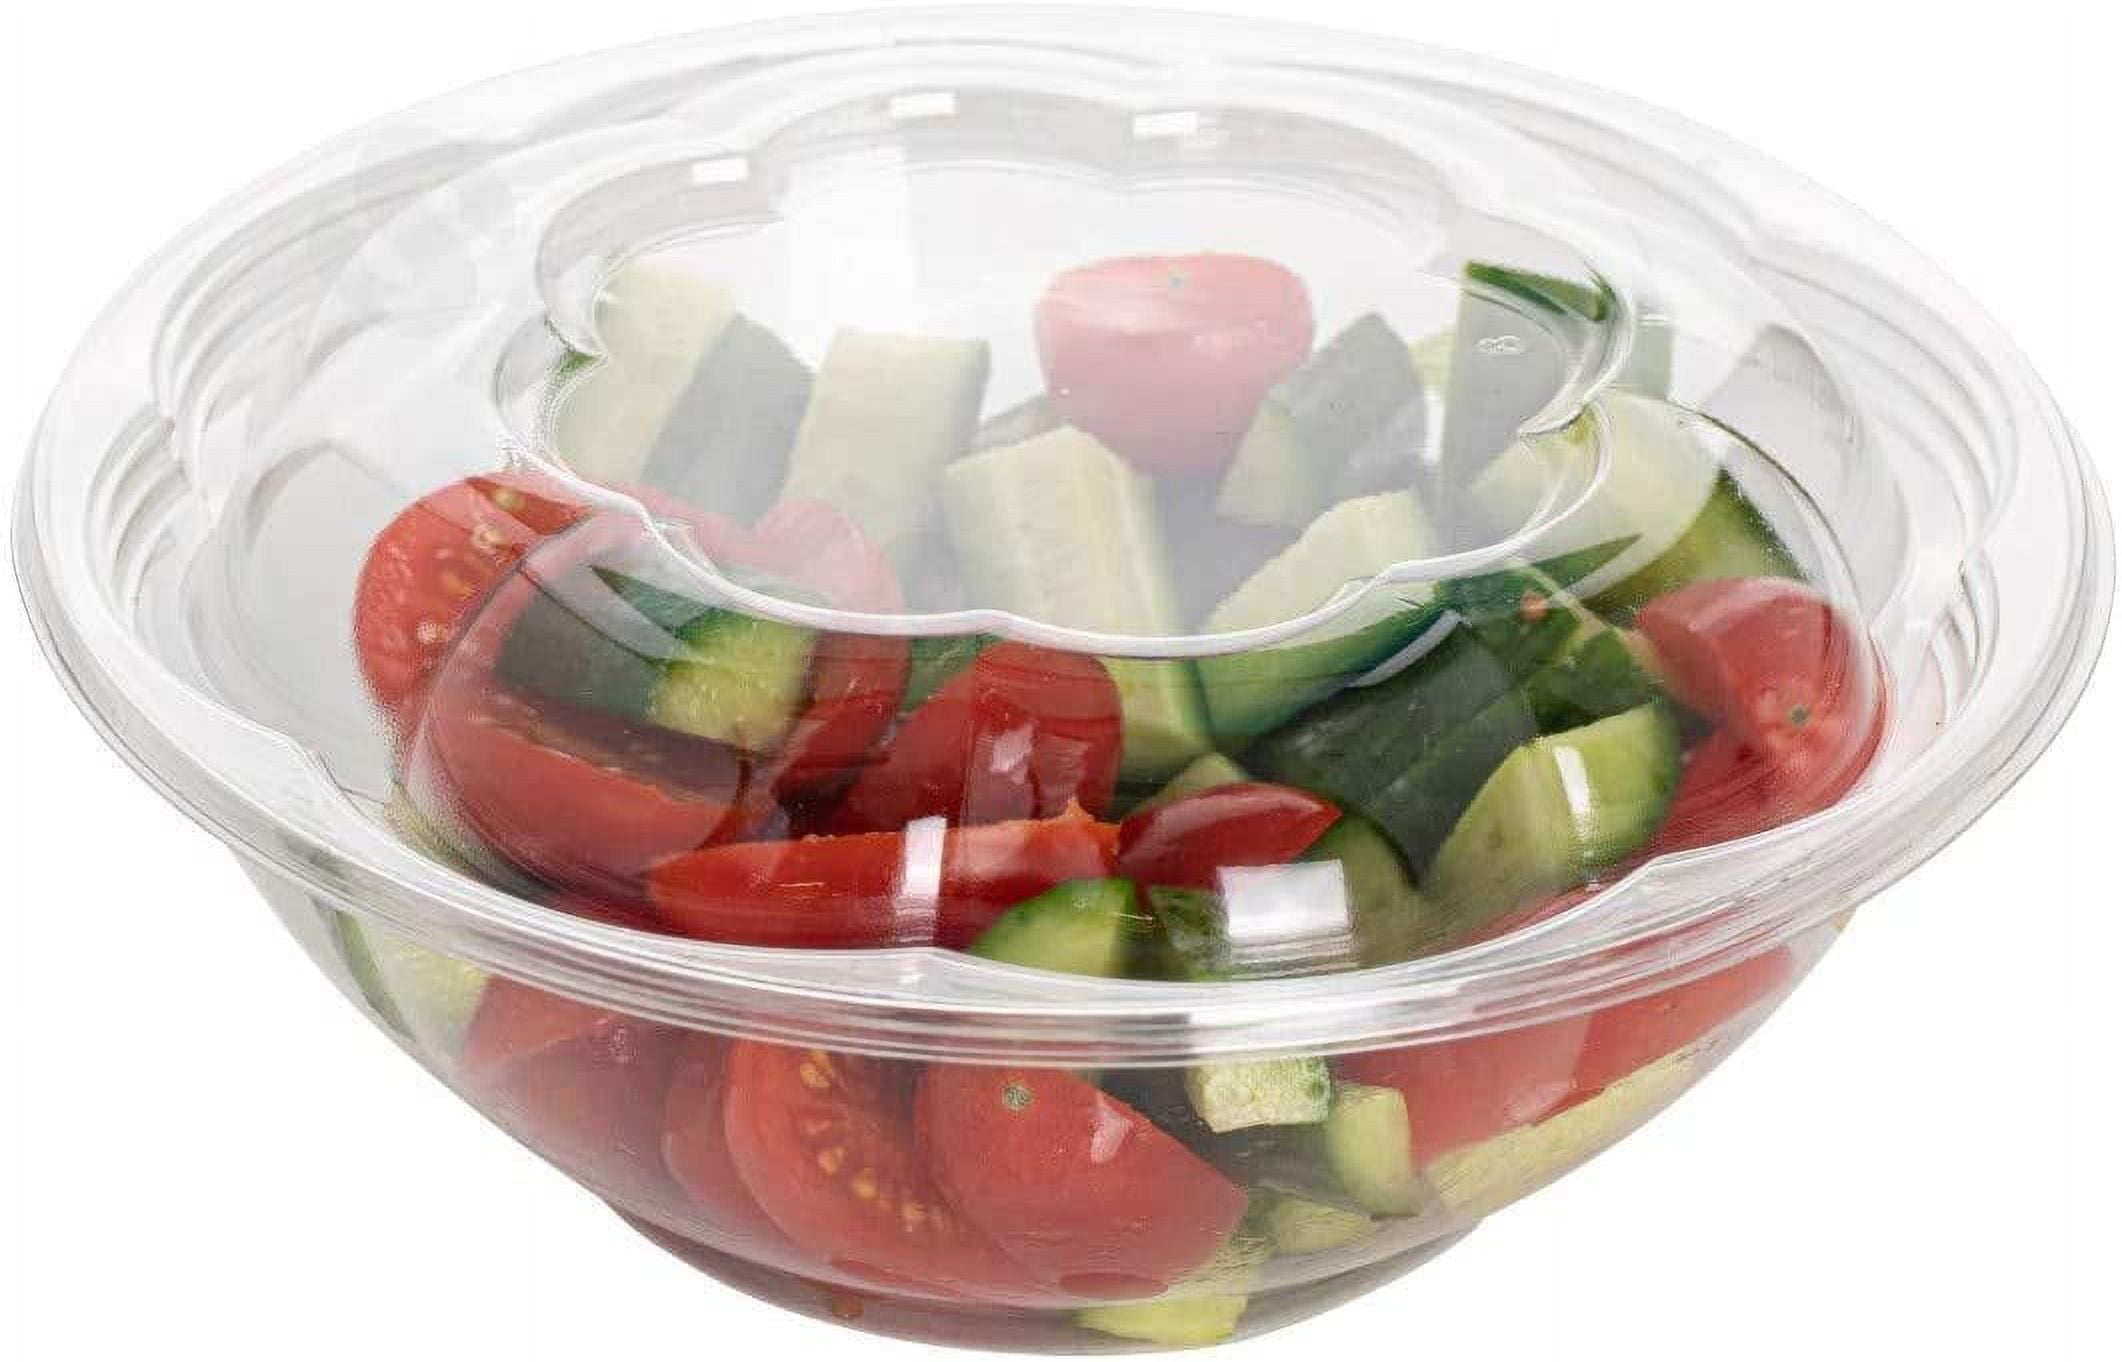 OEM SHAREMAY Msure Portable Salad Lunch Container – Salad Bowl – 2